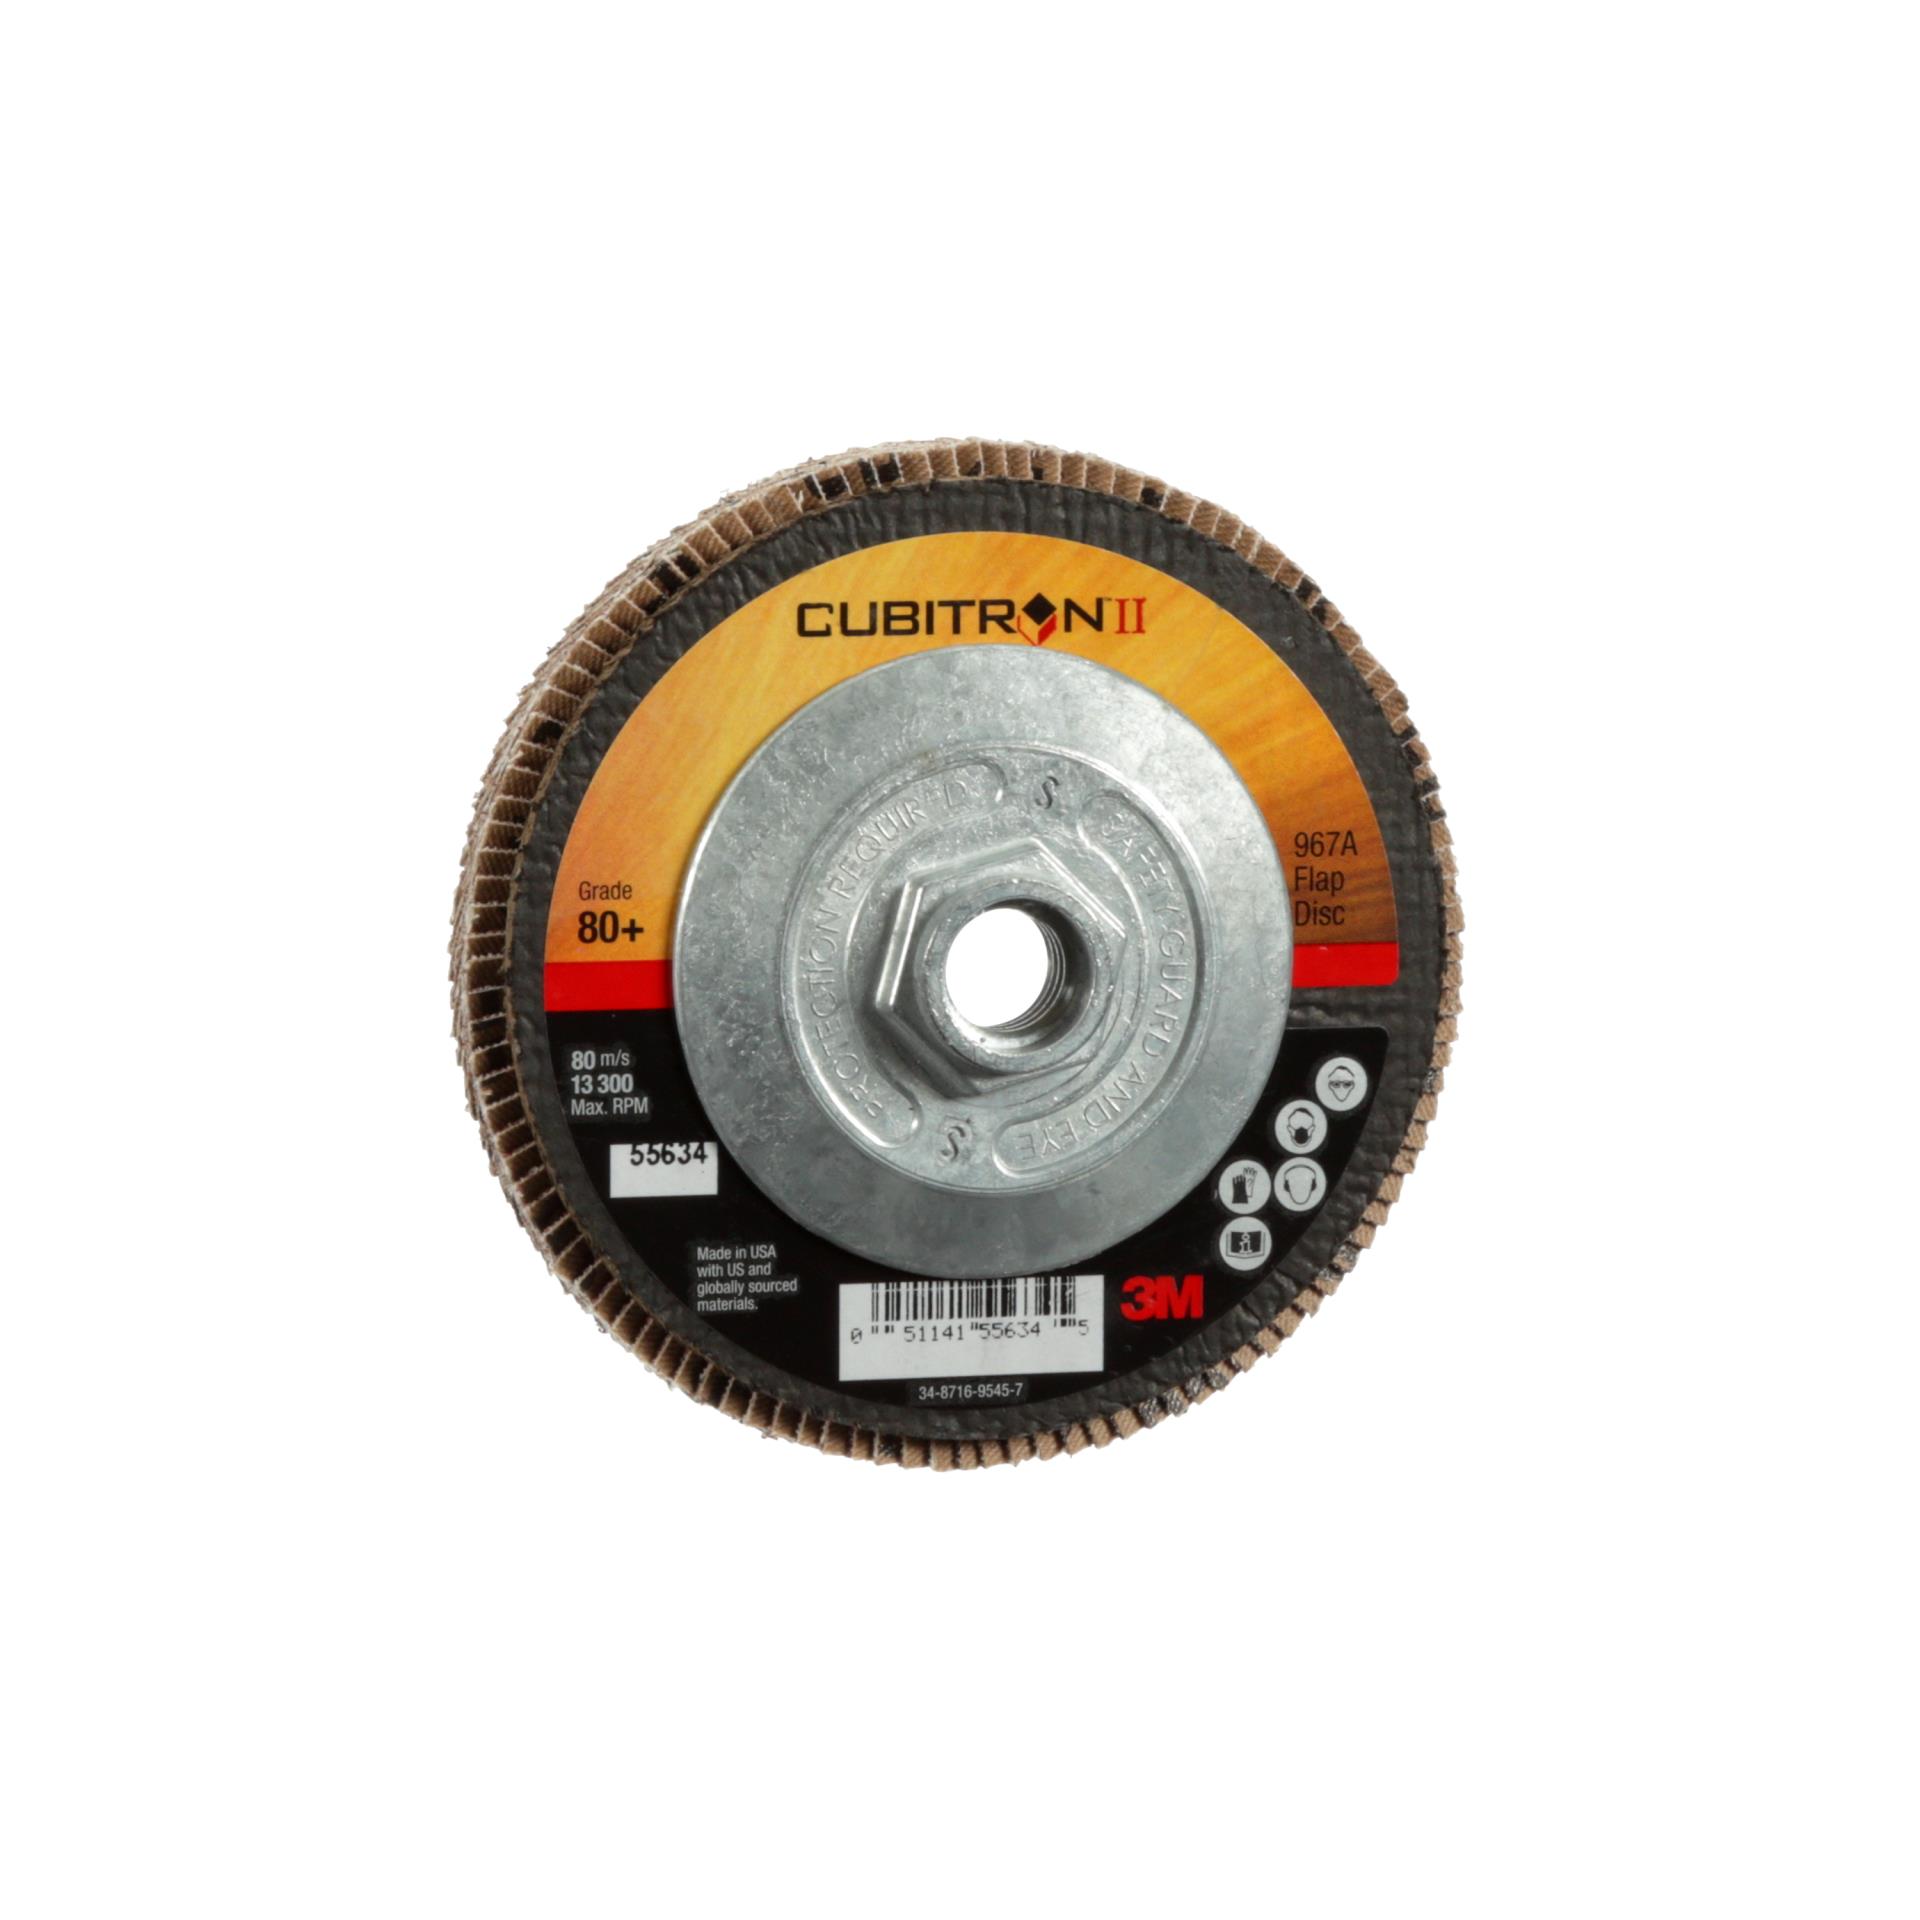 Durometer 70 1950 Lbs.Load Inch Compression Vibration Mount Neoprene 5/8 Hole. Style E 1 Each 